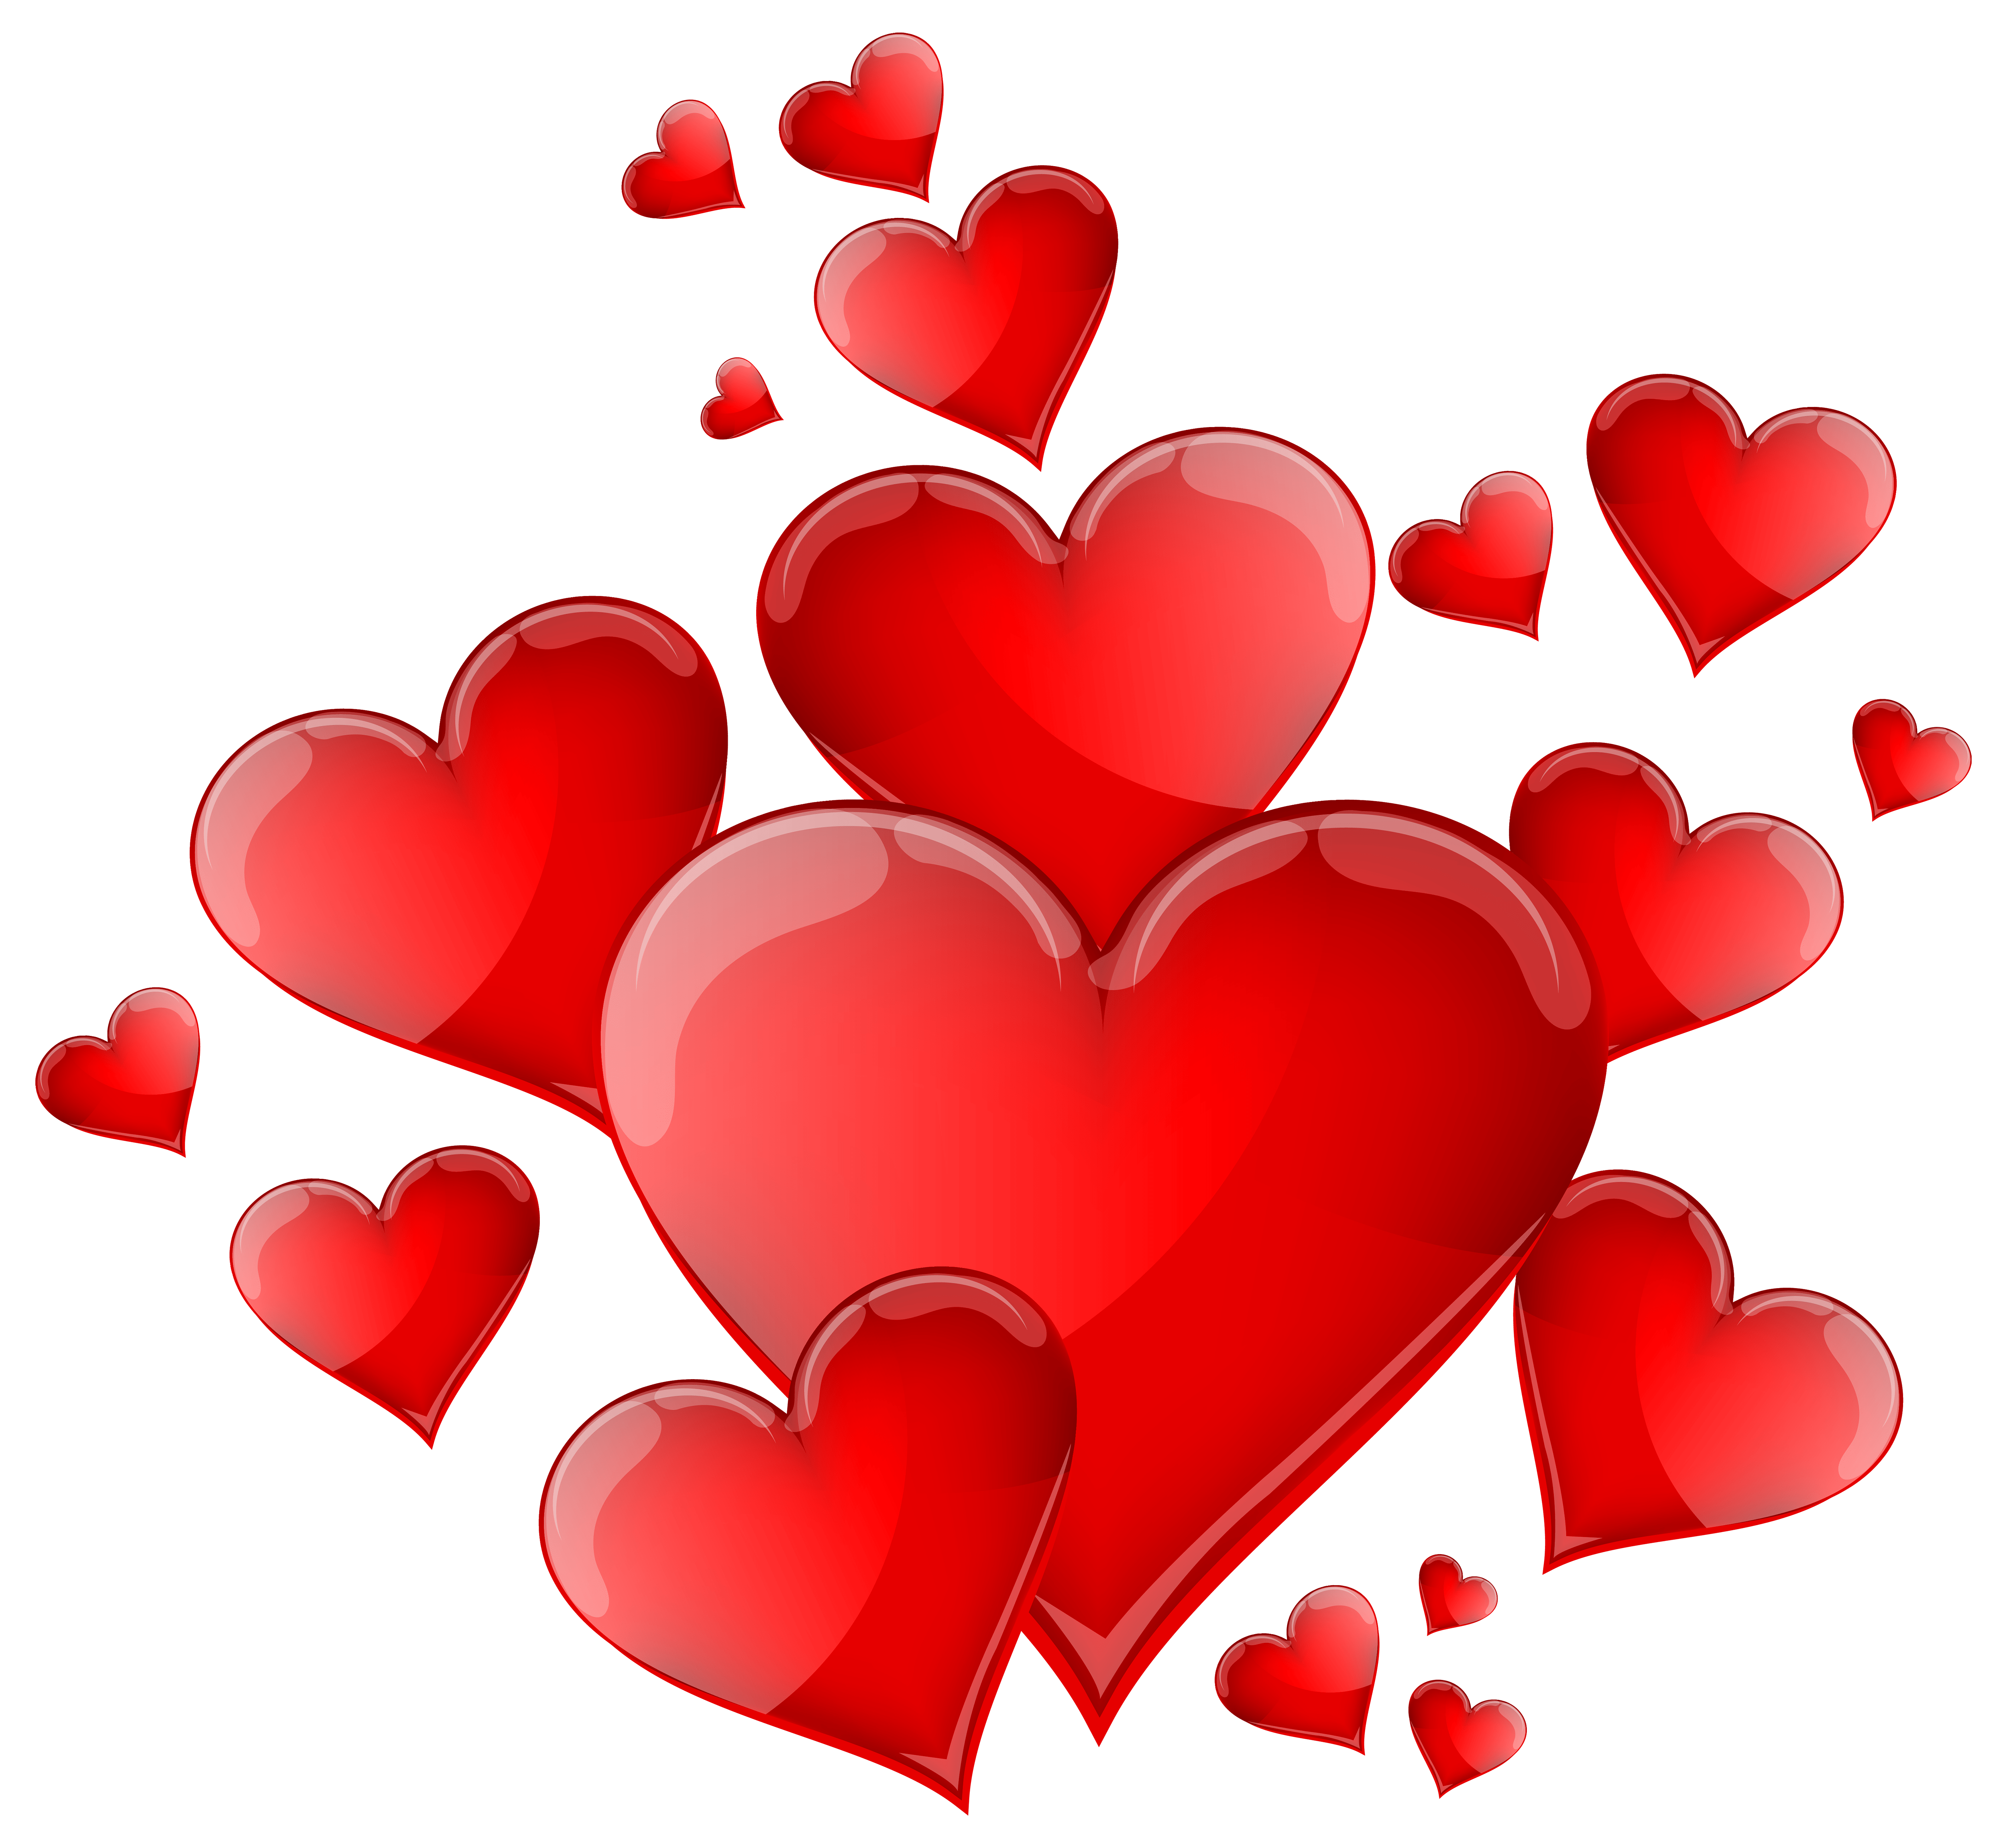 Hearts png images, Hearts png images Transparent FREE for download on